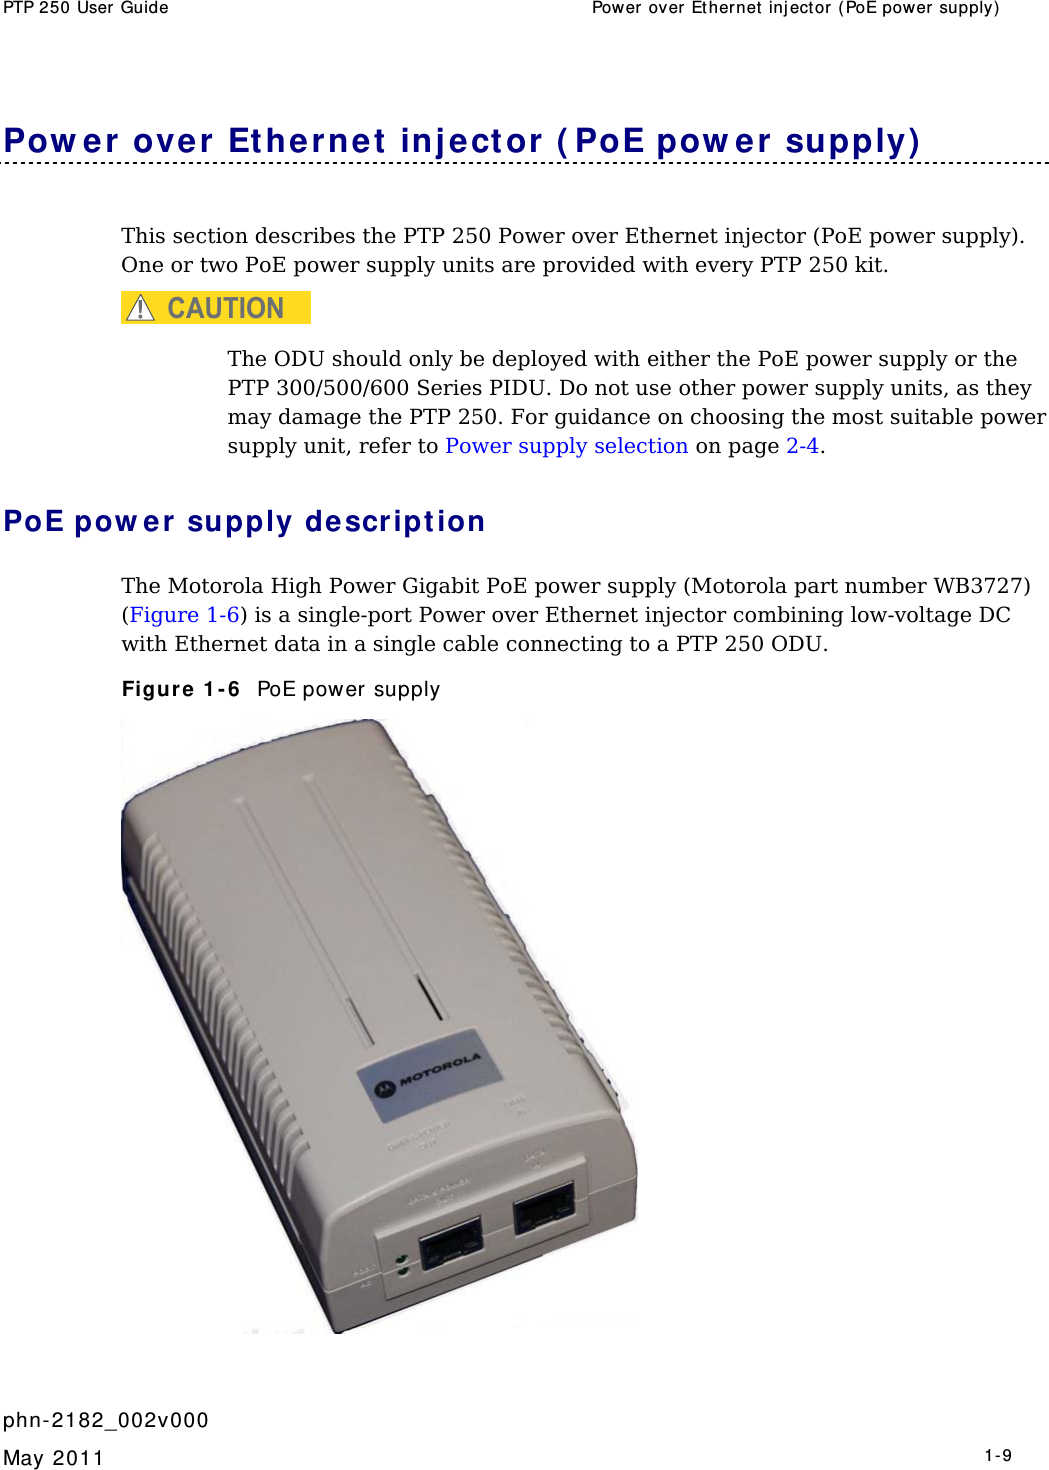 PTP 250 User Guide  Power ov er Ethernet  inj ect or  (PoE power supply)    phn- 2182_002v000   May 2011   1-9  Pow er over Et hernet  inj ector ( PoE pow er supply)  This section describes the PTP 250 Power over Ethernet injector (PoE power supply). One or two PoE power supply units are provided with every PTP 250 kit. CAUTION The ODU should only be deployed with either the PoE power supply or the PTP 300/500/600 Series PIDU. Do not use other power supply units, as they may damage the PTP 250. For guidance on choosing the most suitable power supply unit, refer to Power supply selection on page 2-4. PoE pow er  supply descr ipt ion The Motorola High Power Gigabit PoE power supply (Motorola part number WB3727) (Figure 1-6) is a single-port Power over Ethernet injector combining low-voltage DC with Ethernet data in a single cable connecting to a PTP 250 ODU. Figure 1 - 6   PoE power supply  